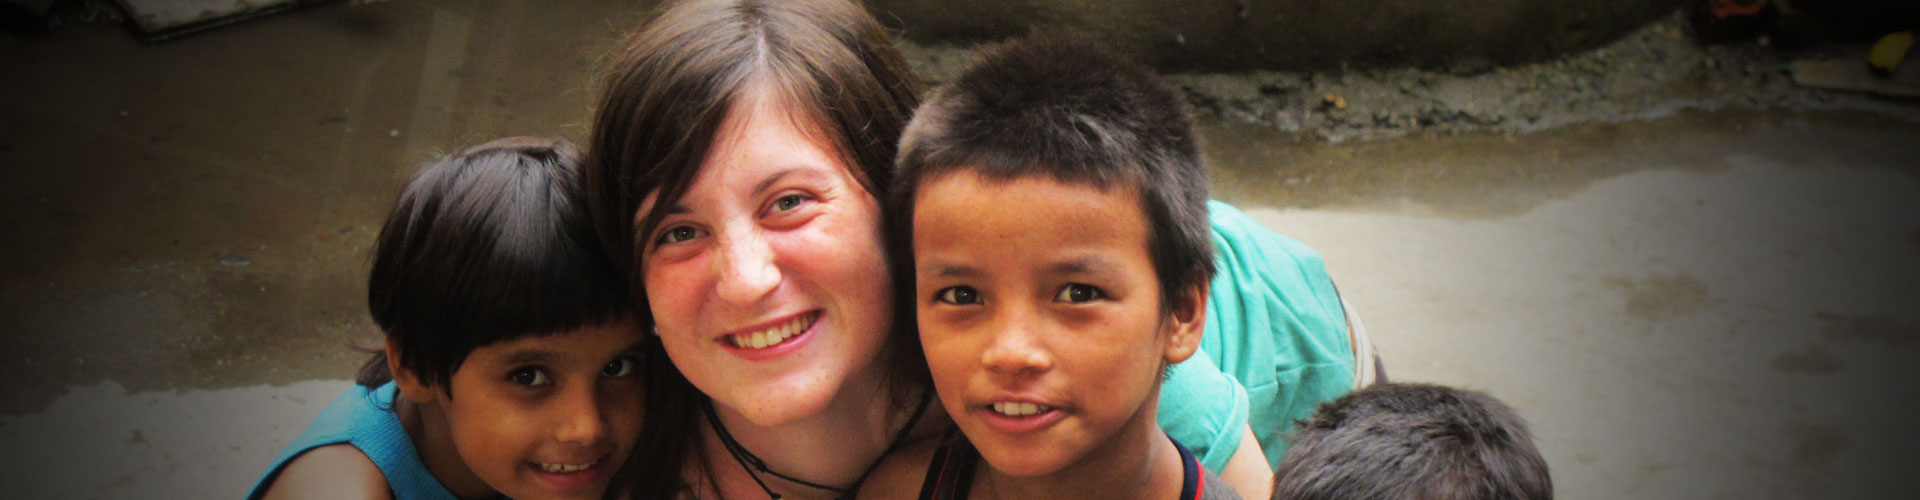 Early Years Childcare Support Program in Nepal 